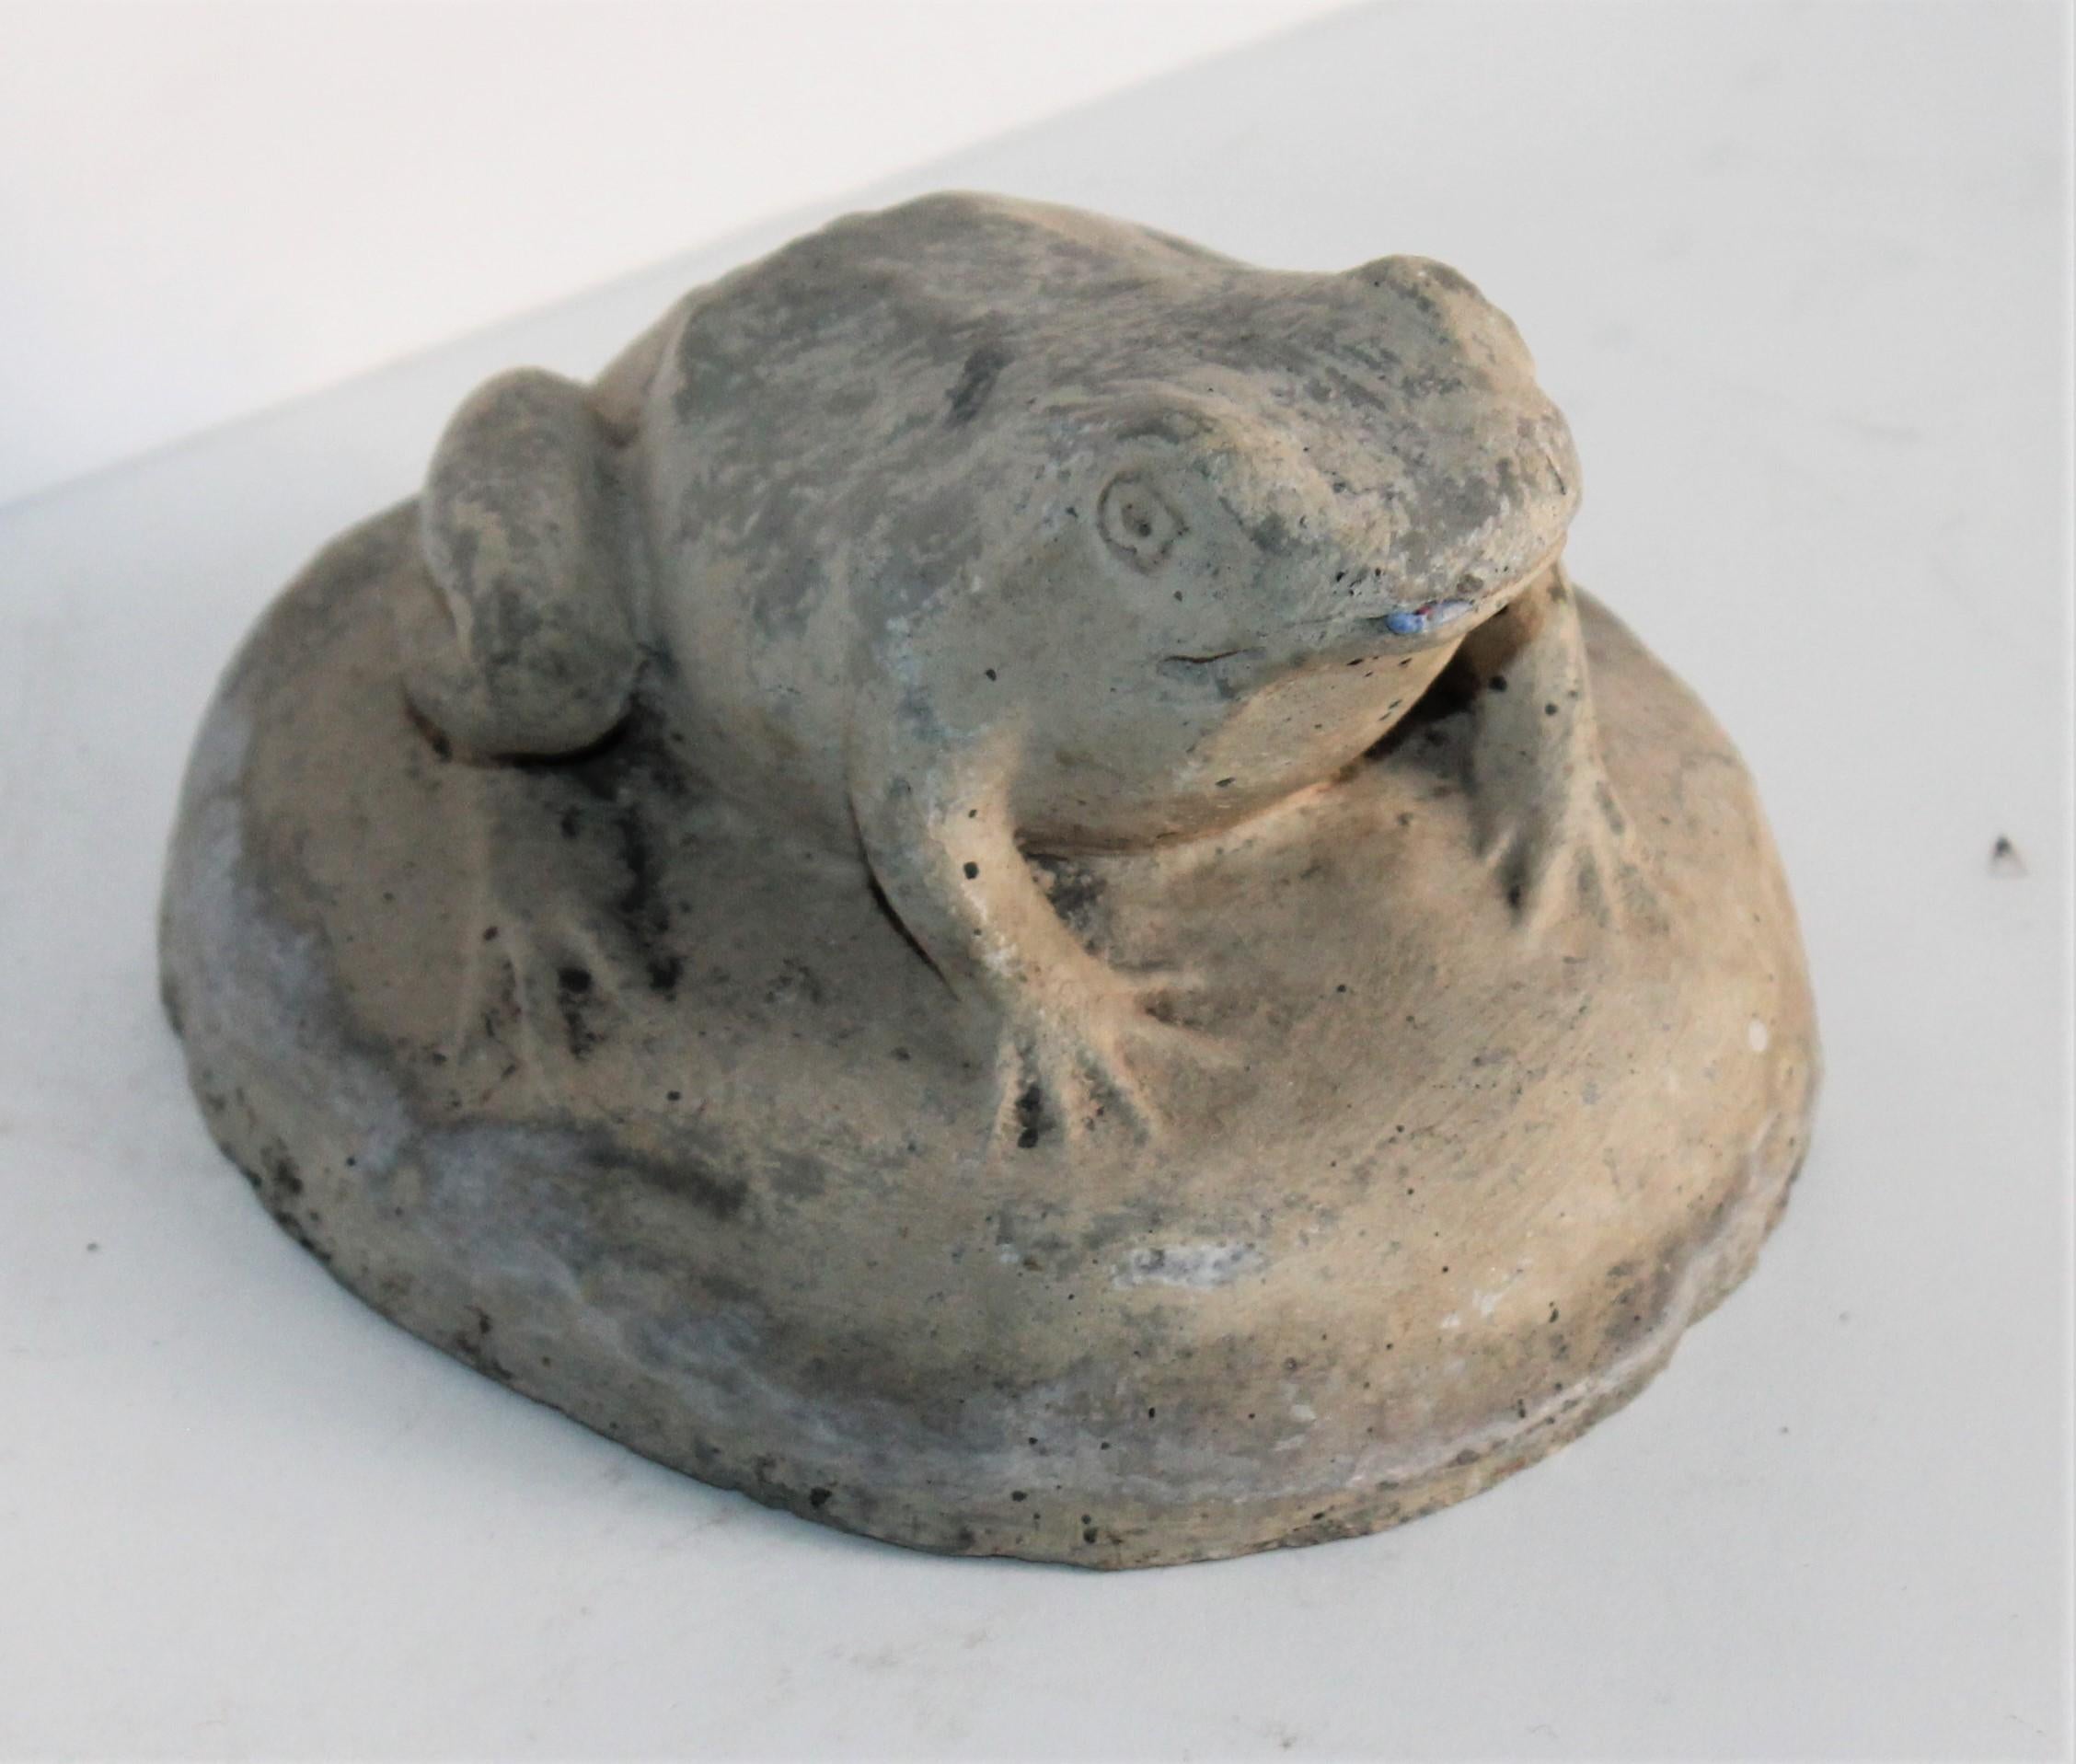 This fun handmade sculpture of a frog is in good condition with minor nicks on the edge consistent from age and use.